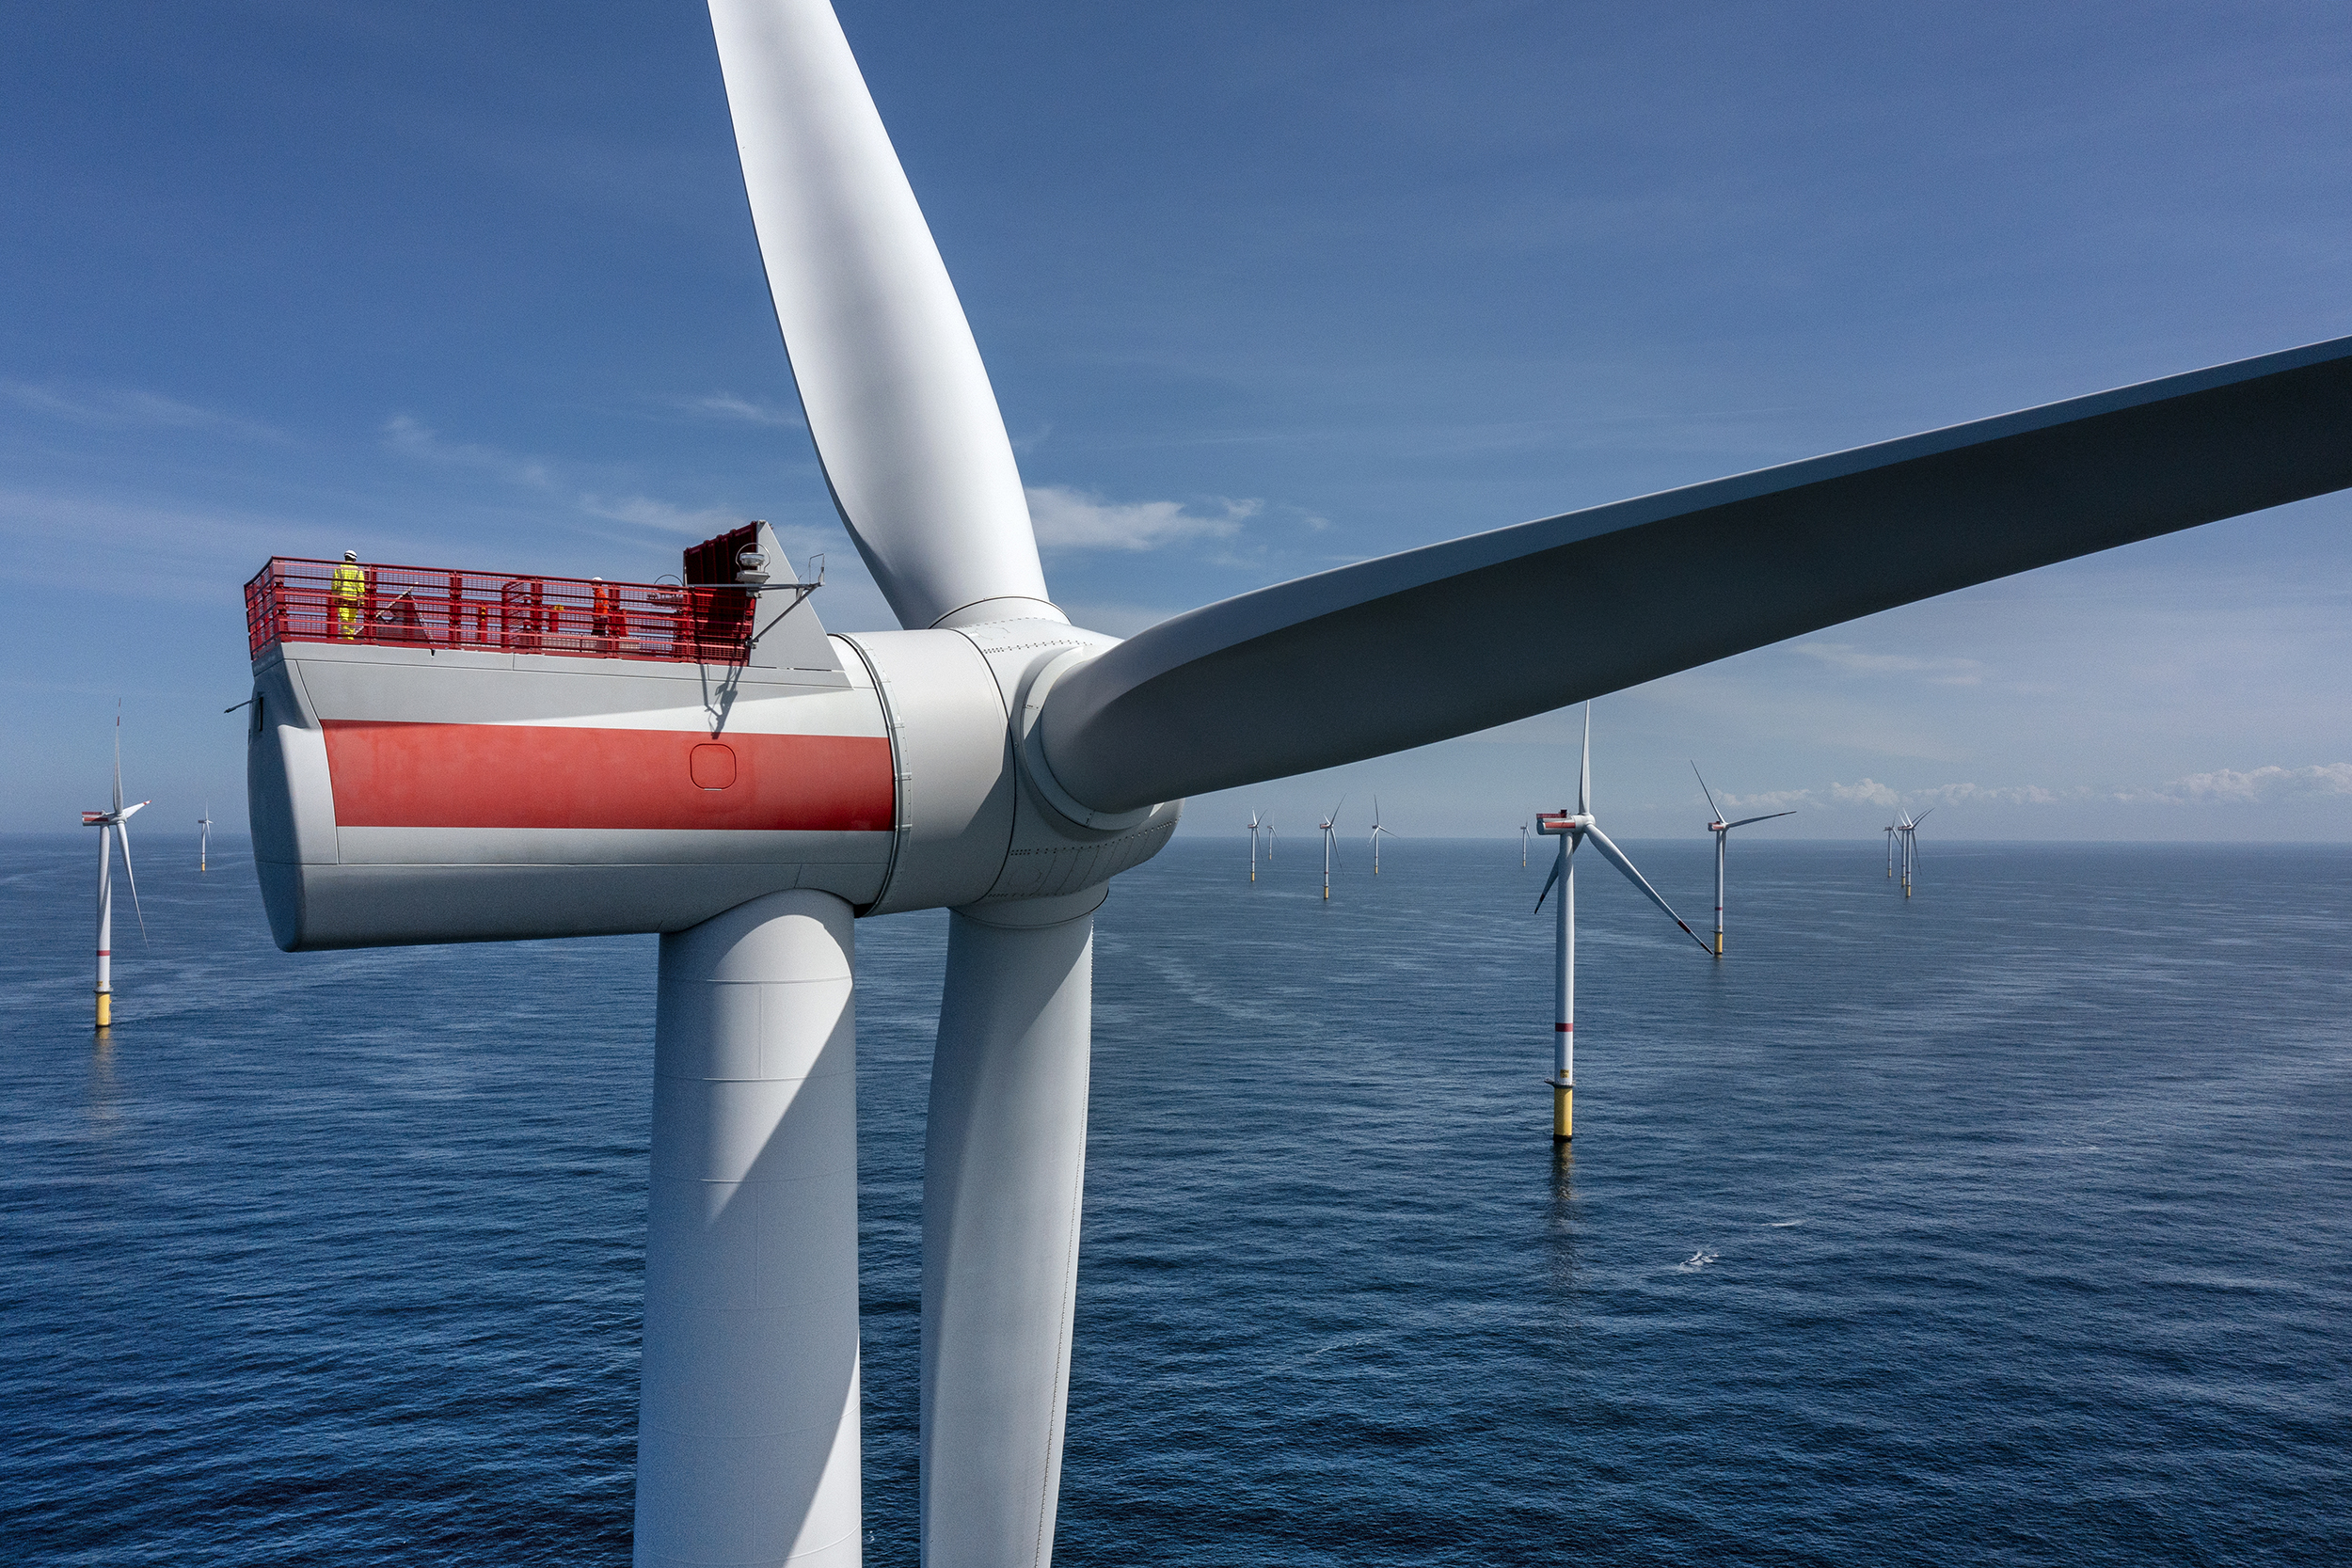 Sunrise Wind is bringing offshore wind farm power to New York